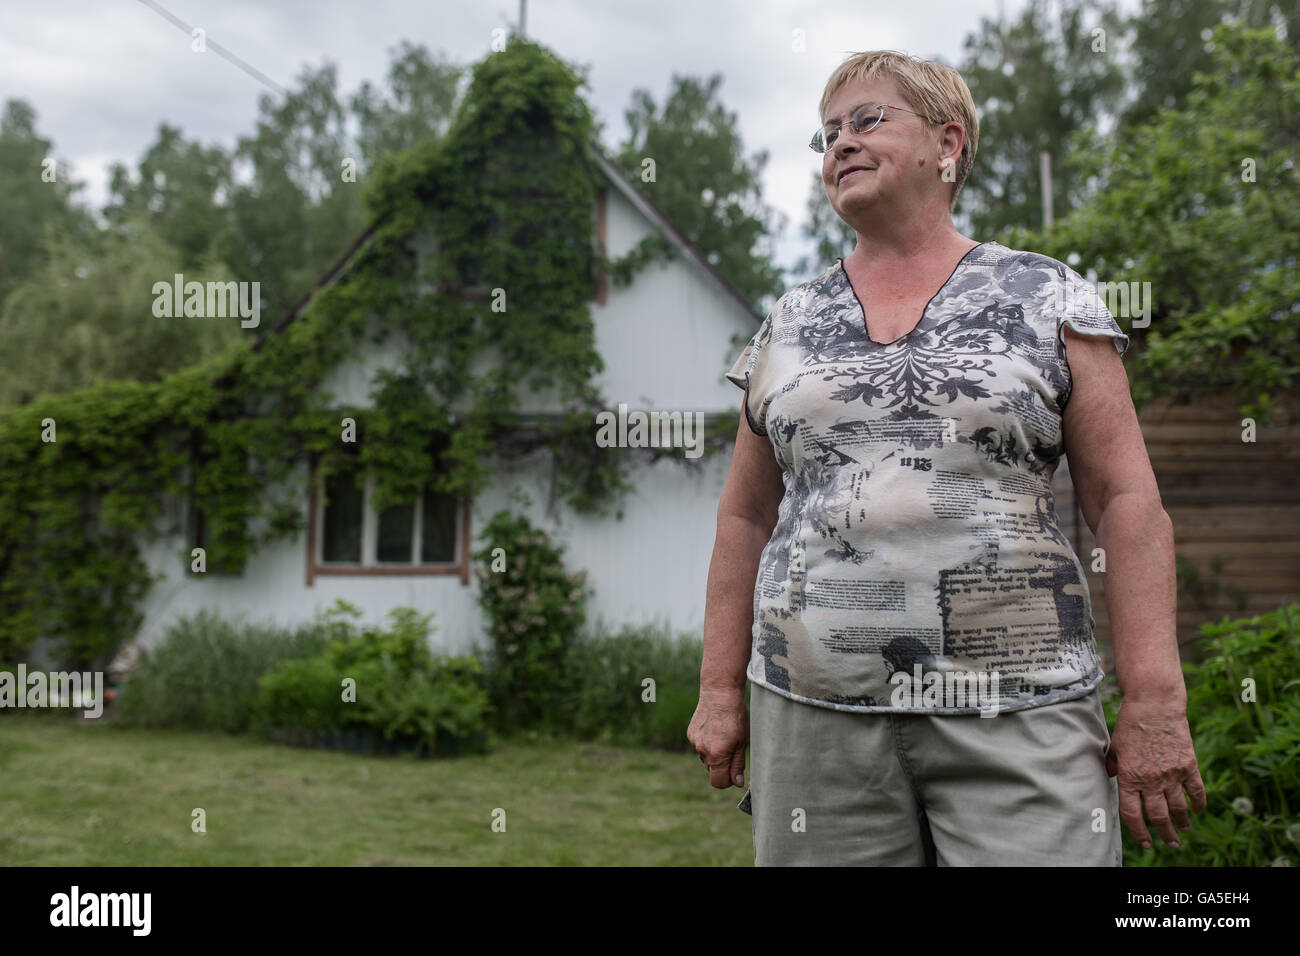 Tula, Russia. 28th May, 2016. Tatyana is seen in her dacha in the environs of Tula, Russia, on May 28, 2016. Dacha is a traditional Russian country house with a yard for summer. Dachas used to be a place to unite families and co-workers who were given the land. Today they are changing---new buyers come and make dachas a villa to take rest from noisy urban sprawl and neighbours. © Evgeny Sinitsyn/Xinhua/Alamy Live News Stock Photo